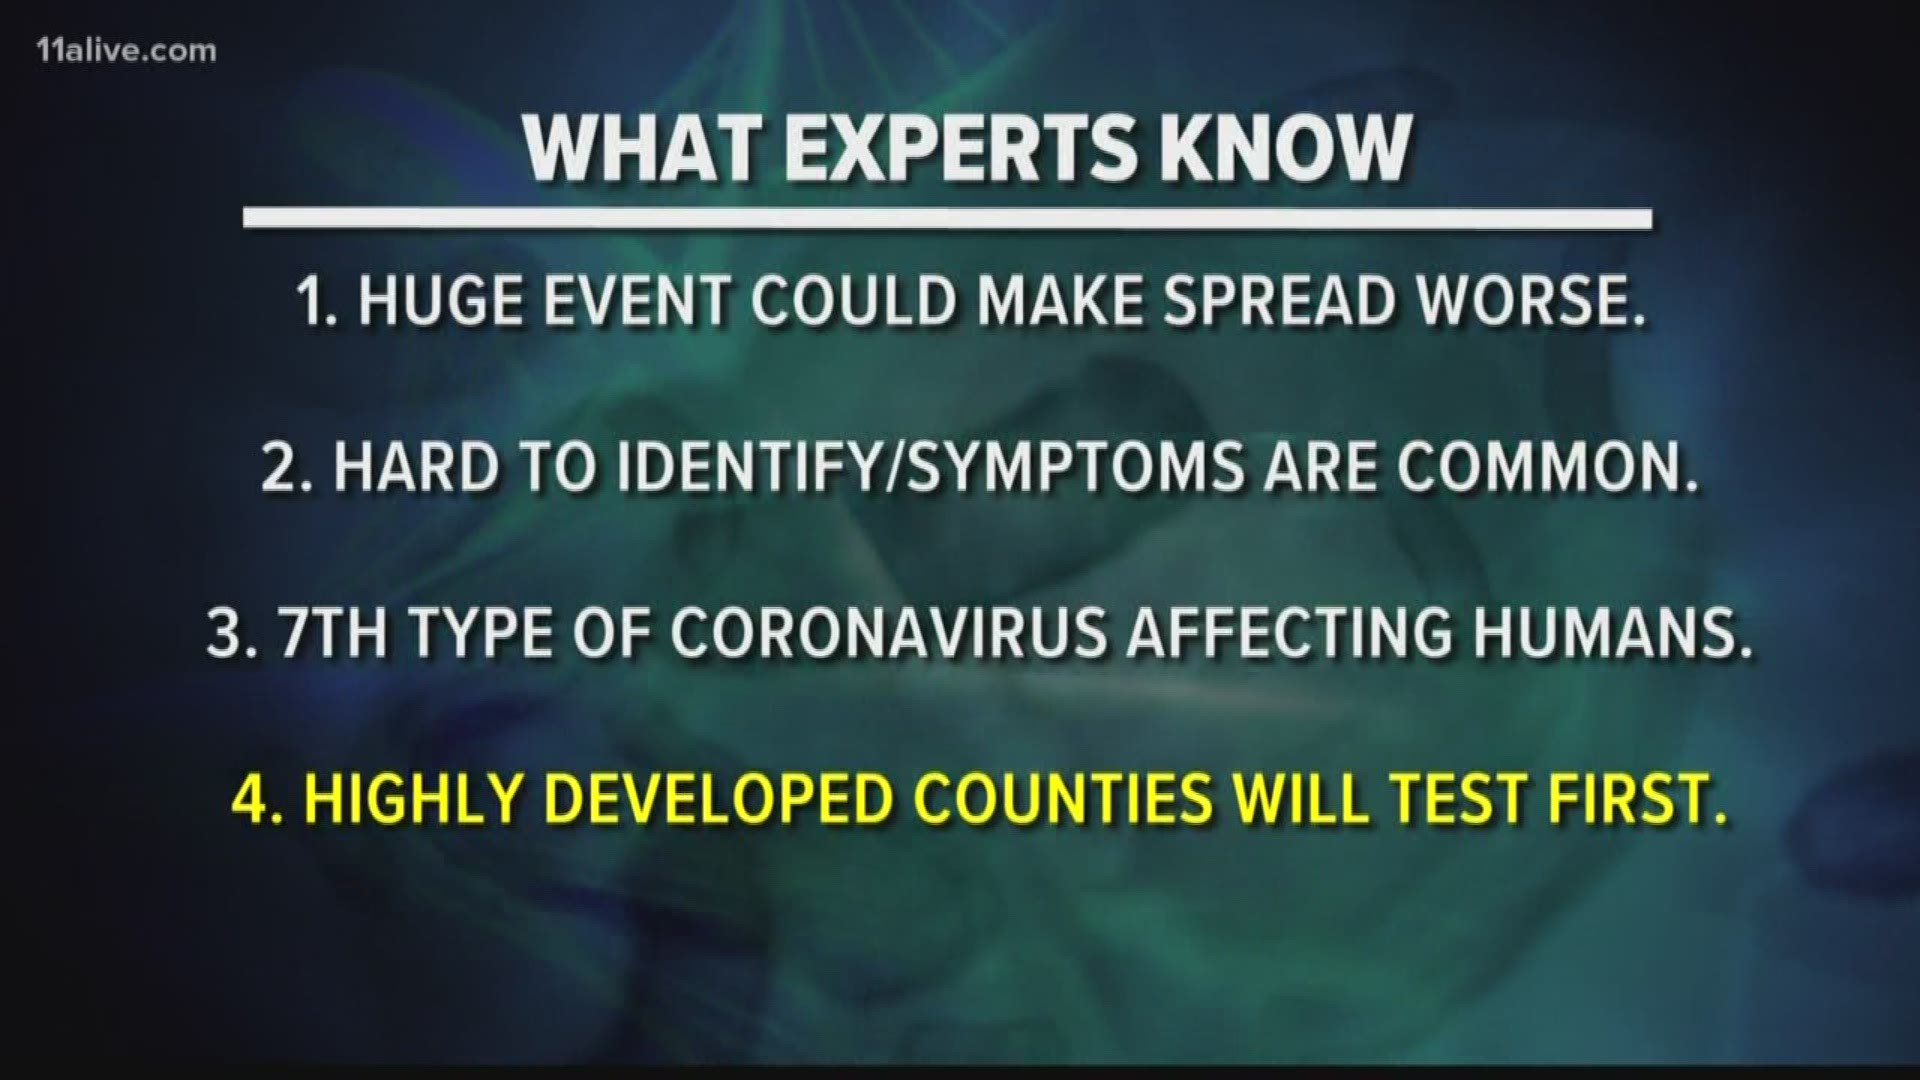 As the U.S. confirms its first case of the virus, medical experts are uncovering more information.